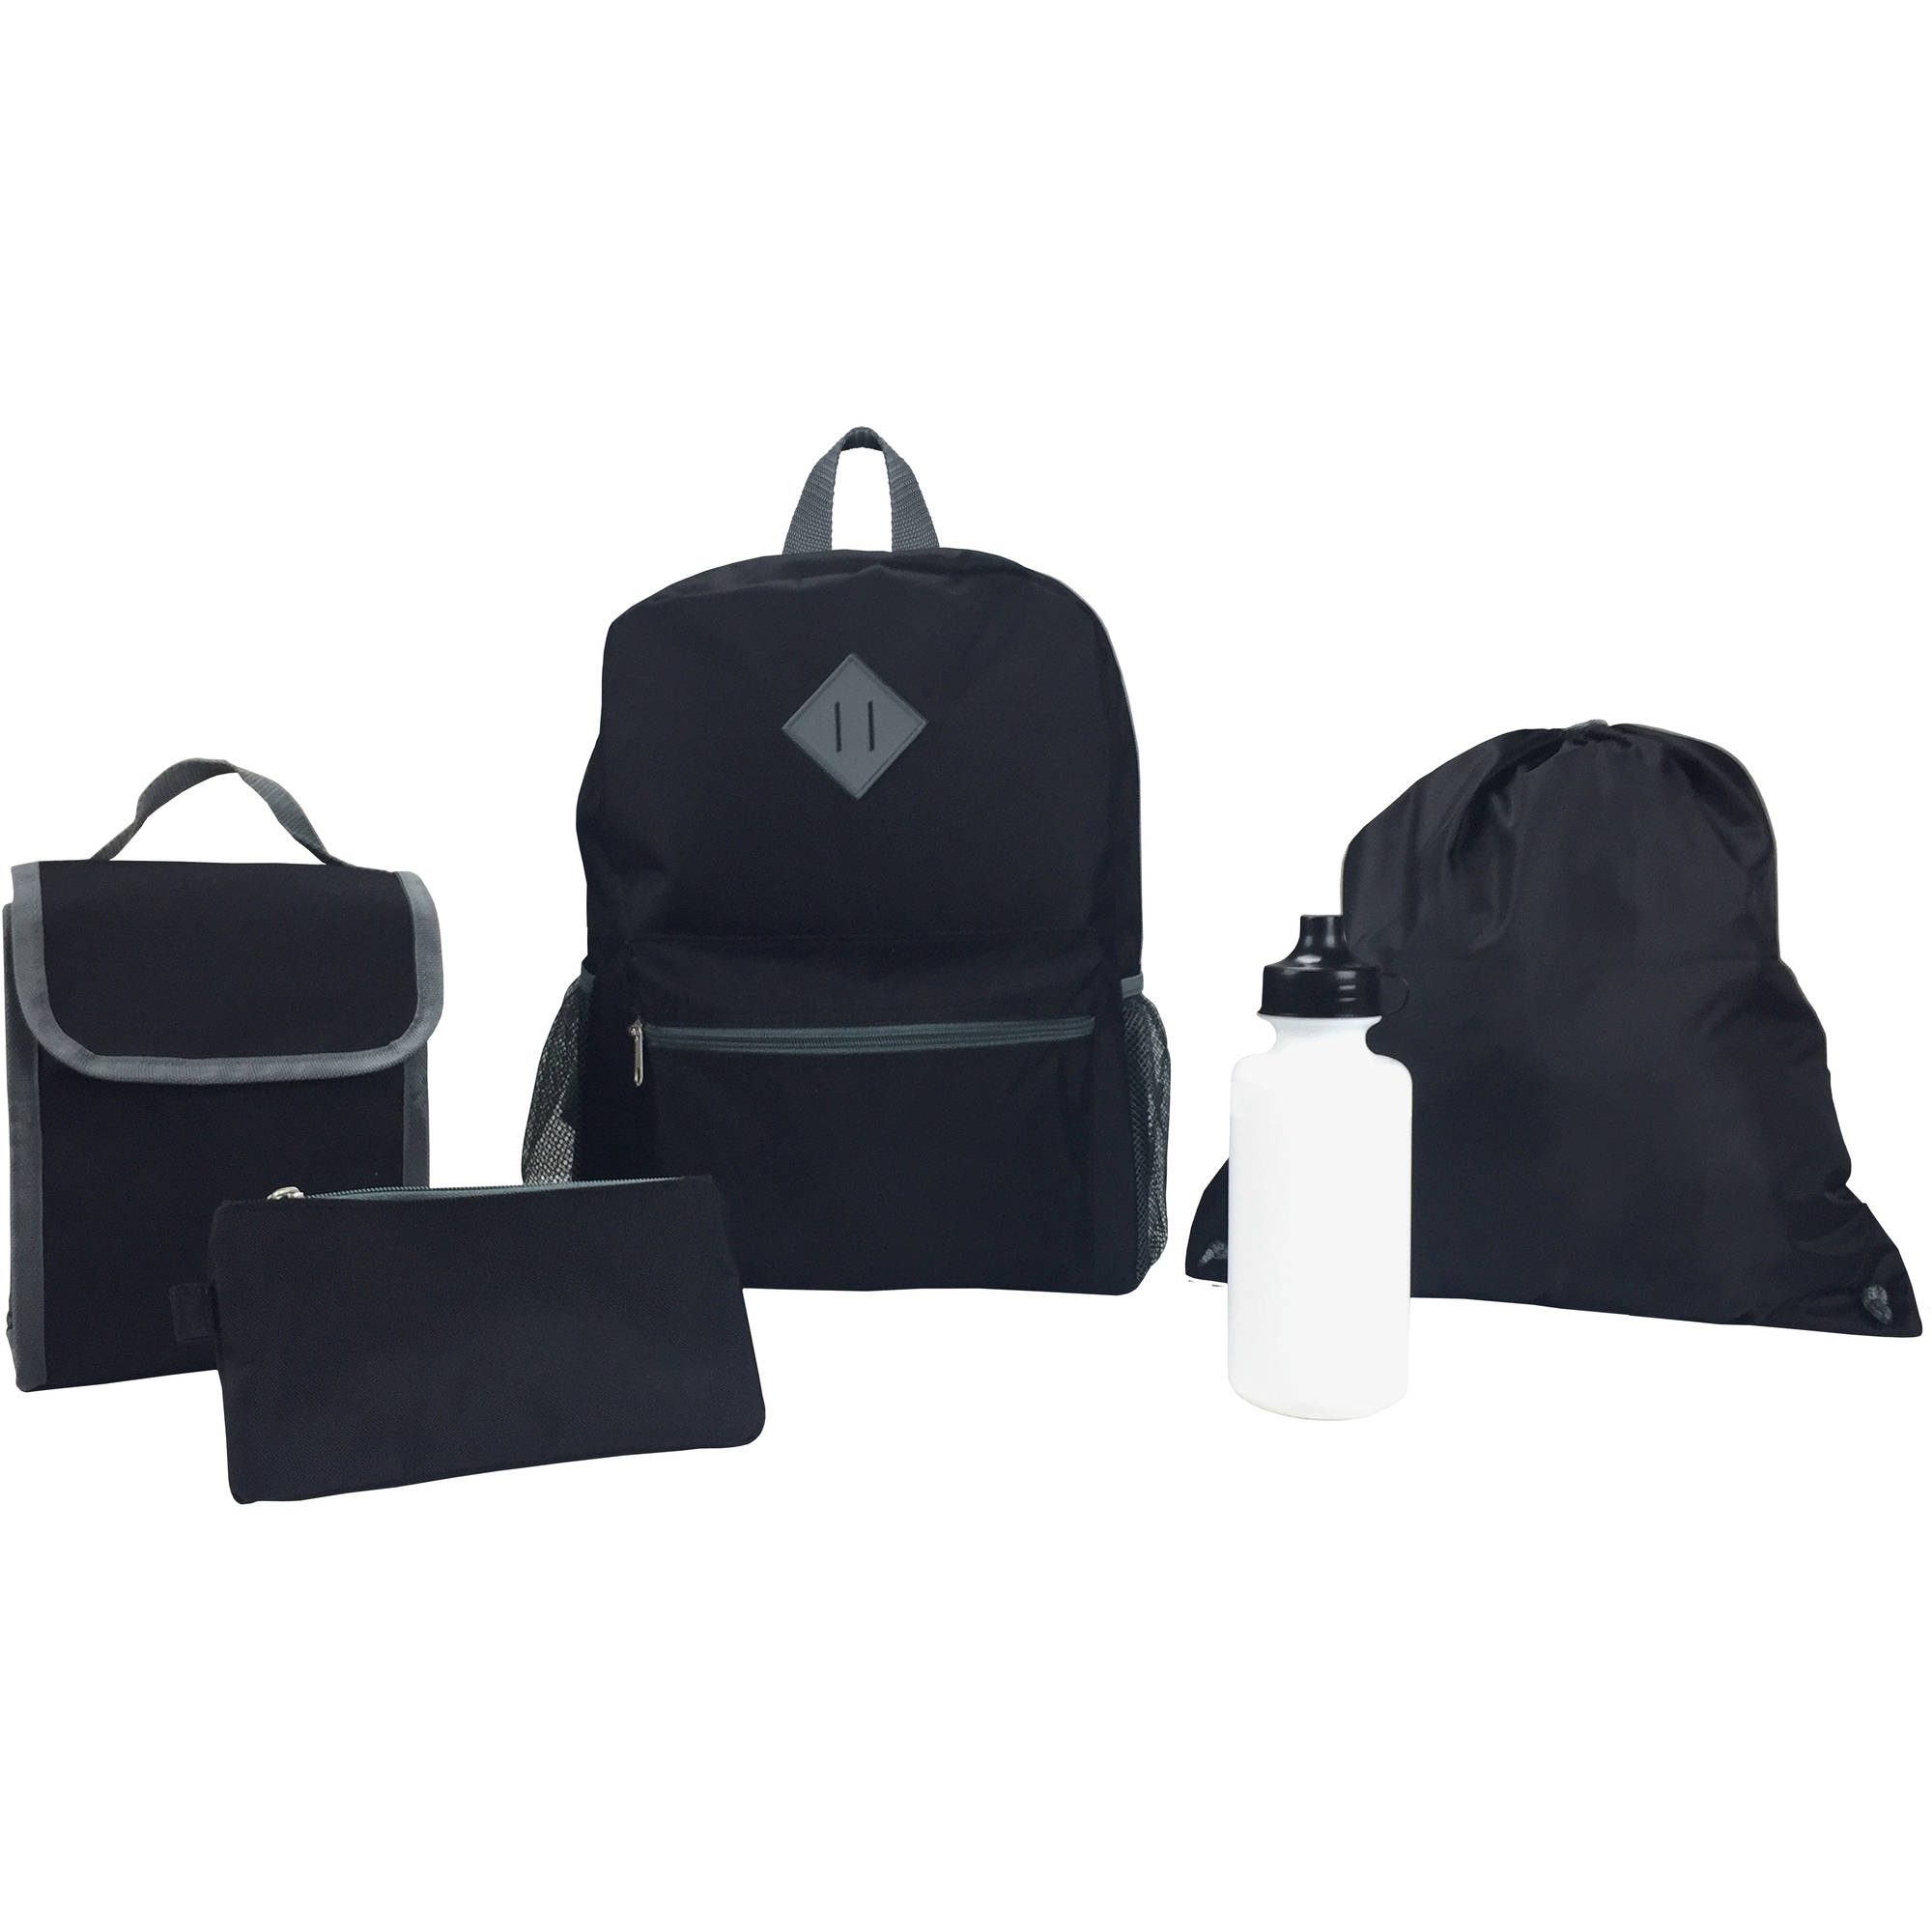 Kids 5 Piece backpack wth Lunch Bag, Waterbottle, Cinch bag and Pencil Case - image 1 of 6